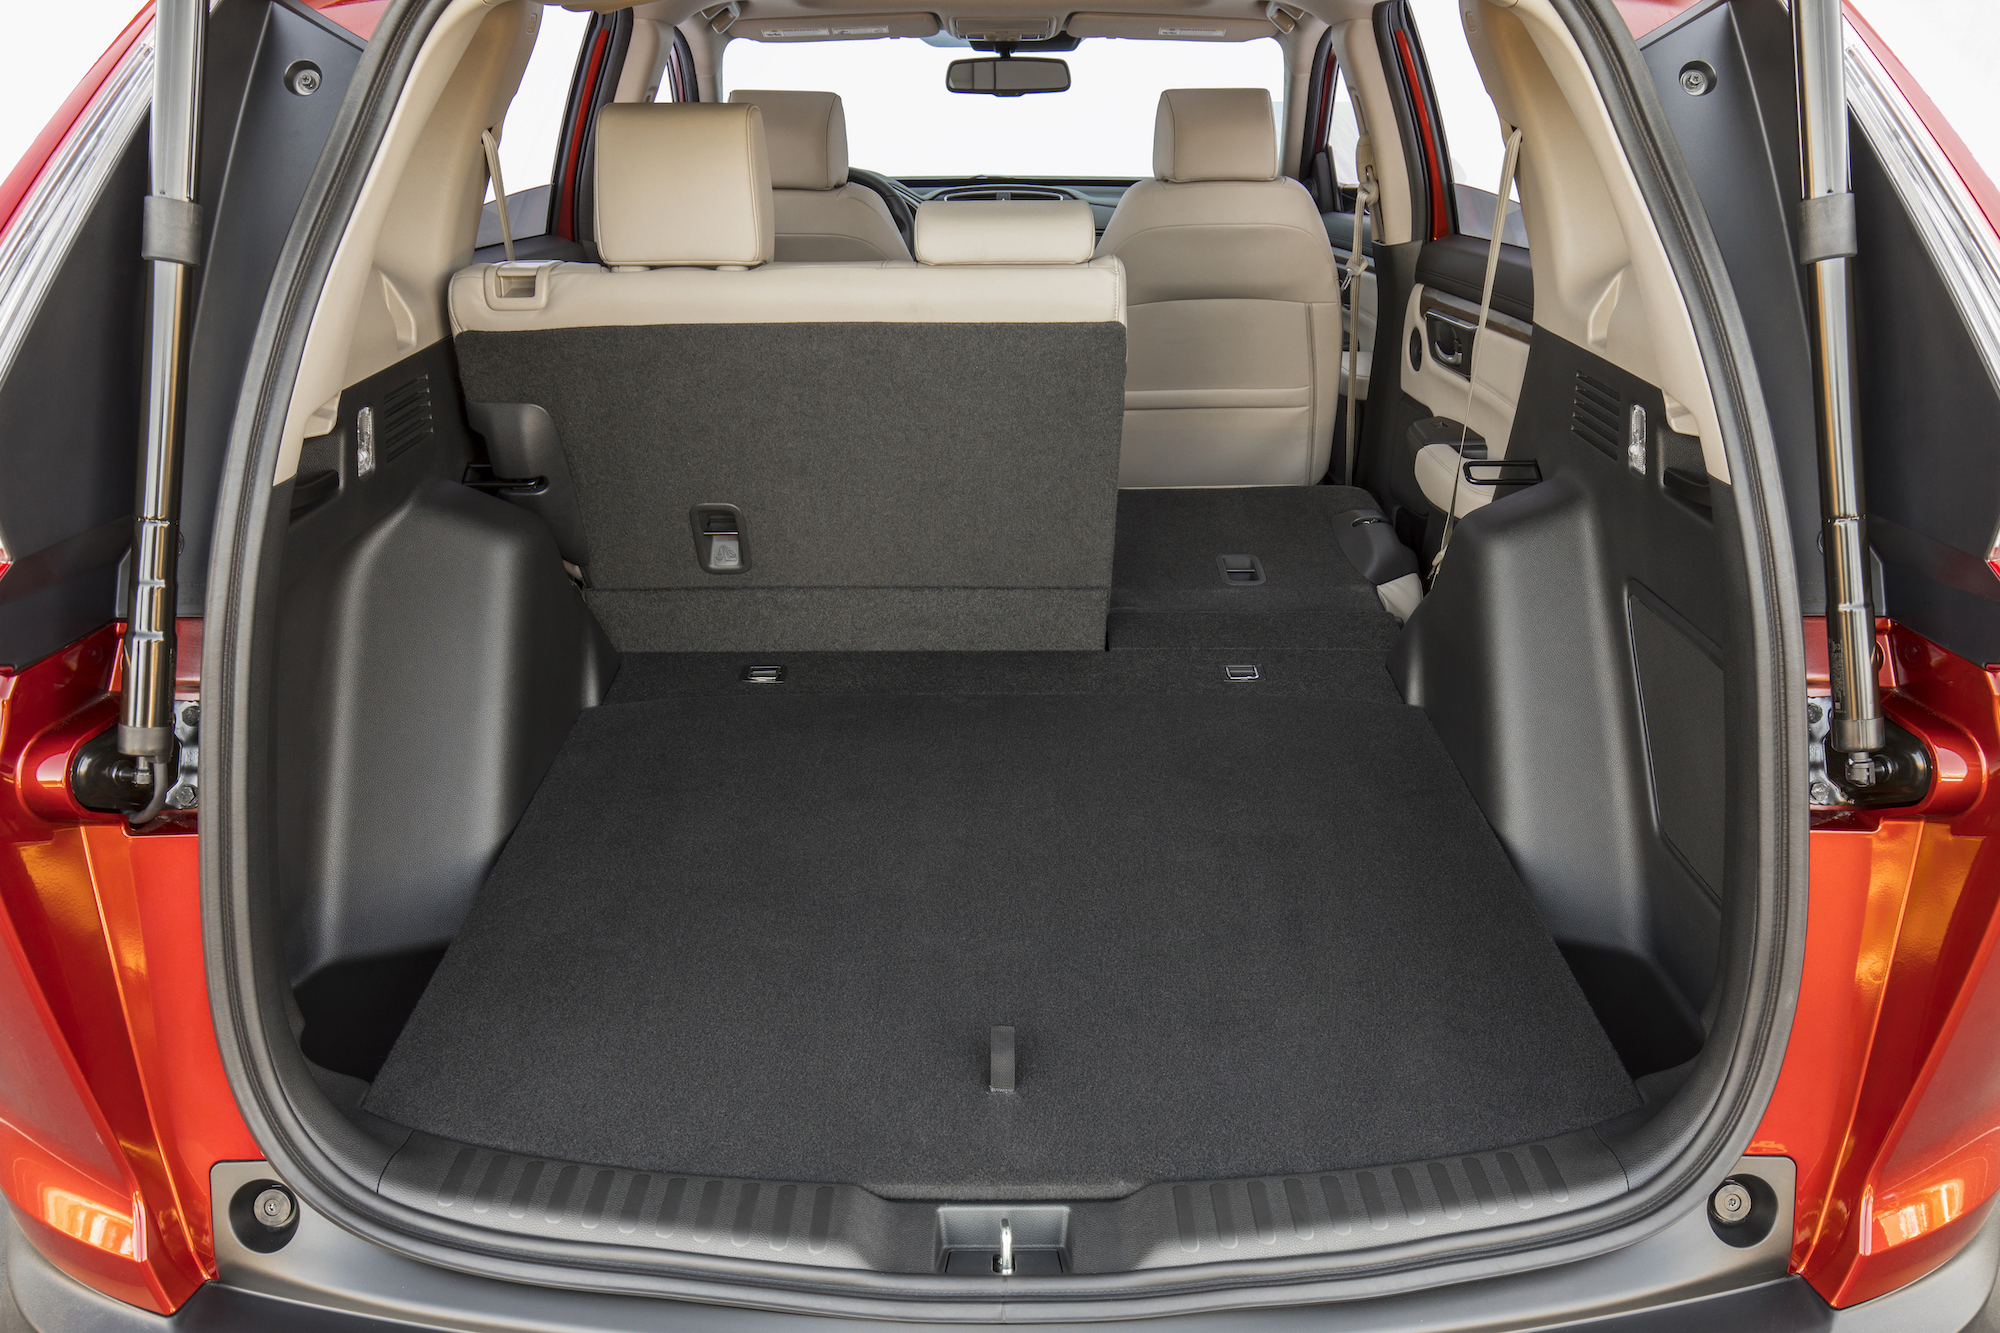 3 New Compact SUVs With the Most Cargo Space